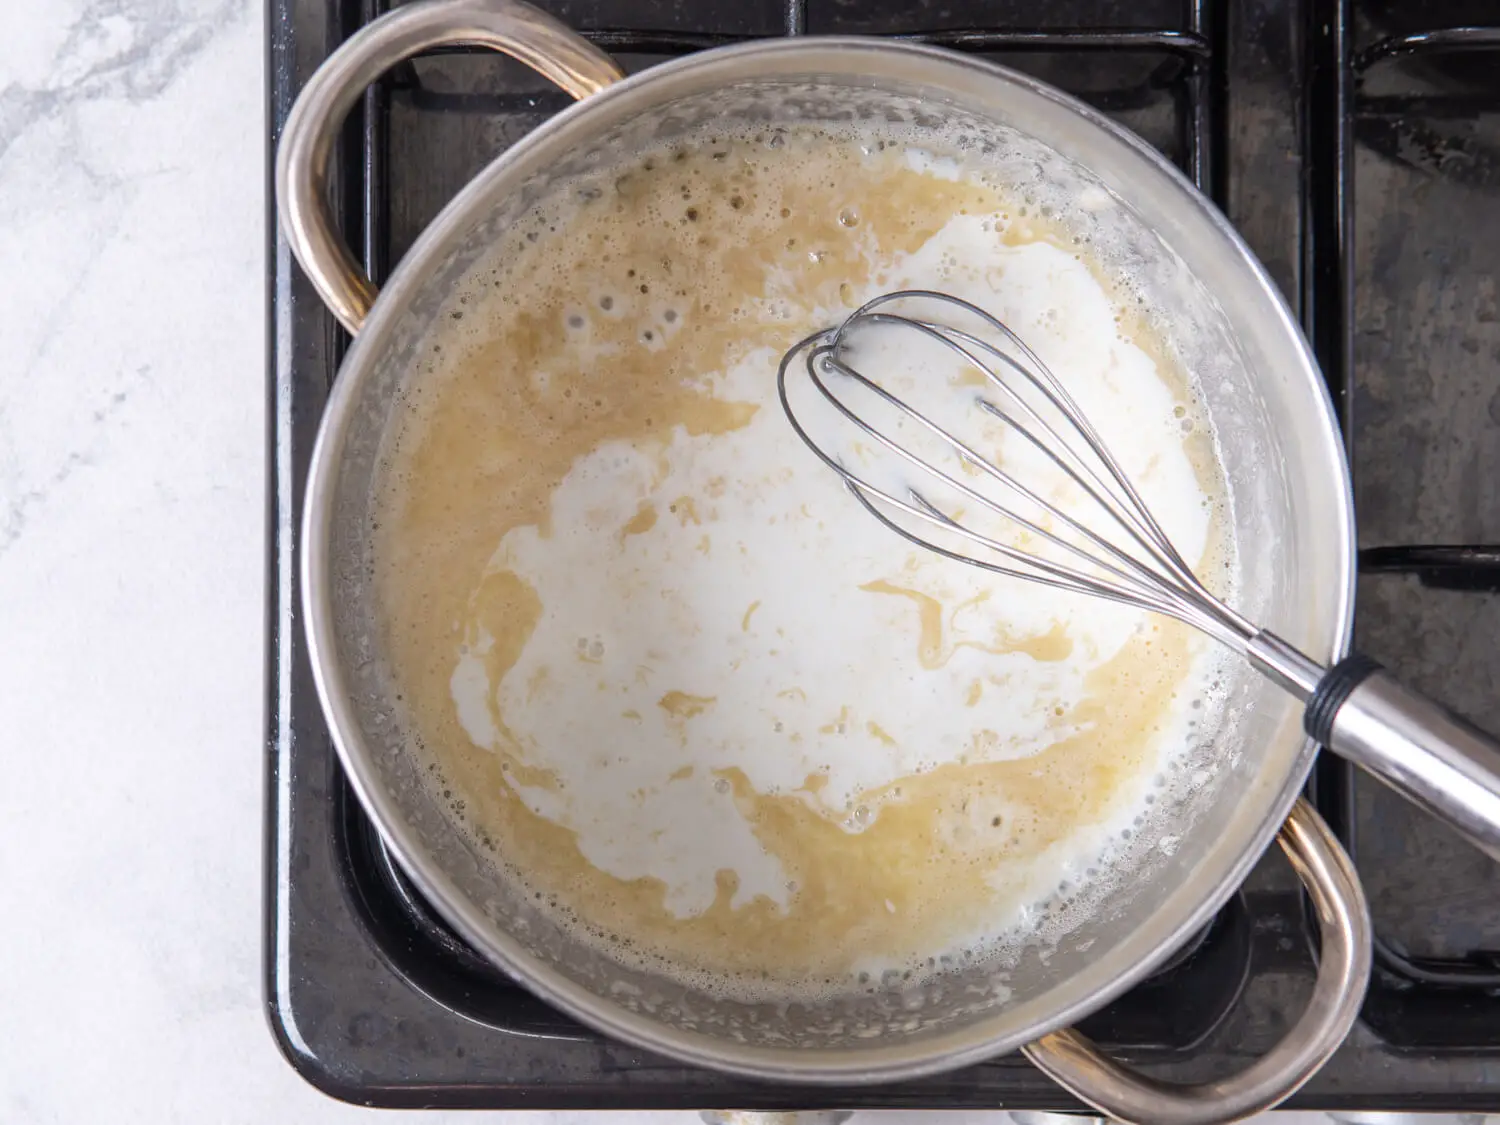 Cook for another 5-7 minutes, or until the roux has turned a light golden color.